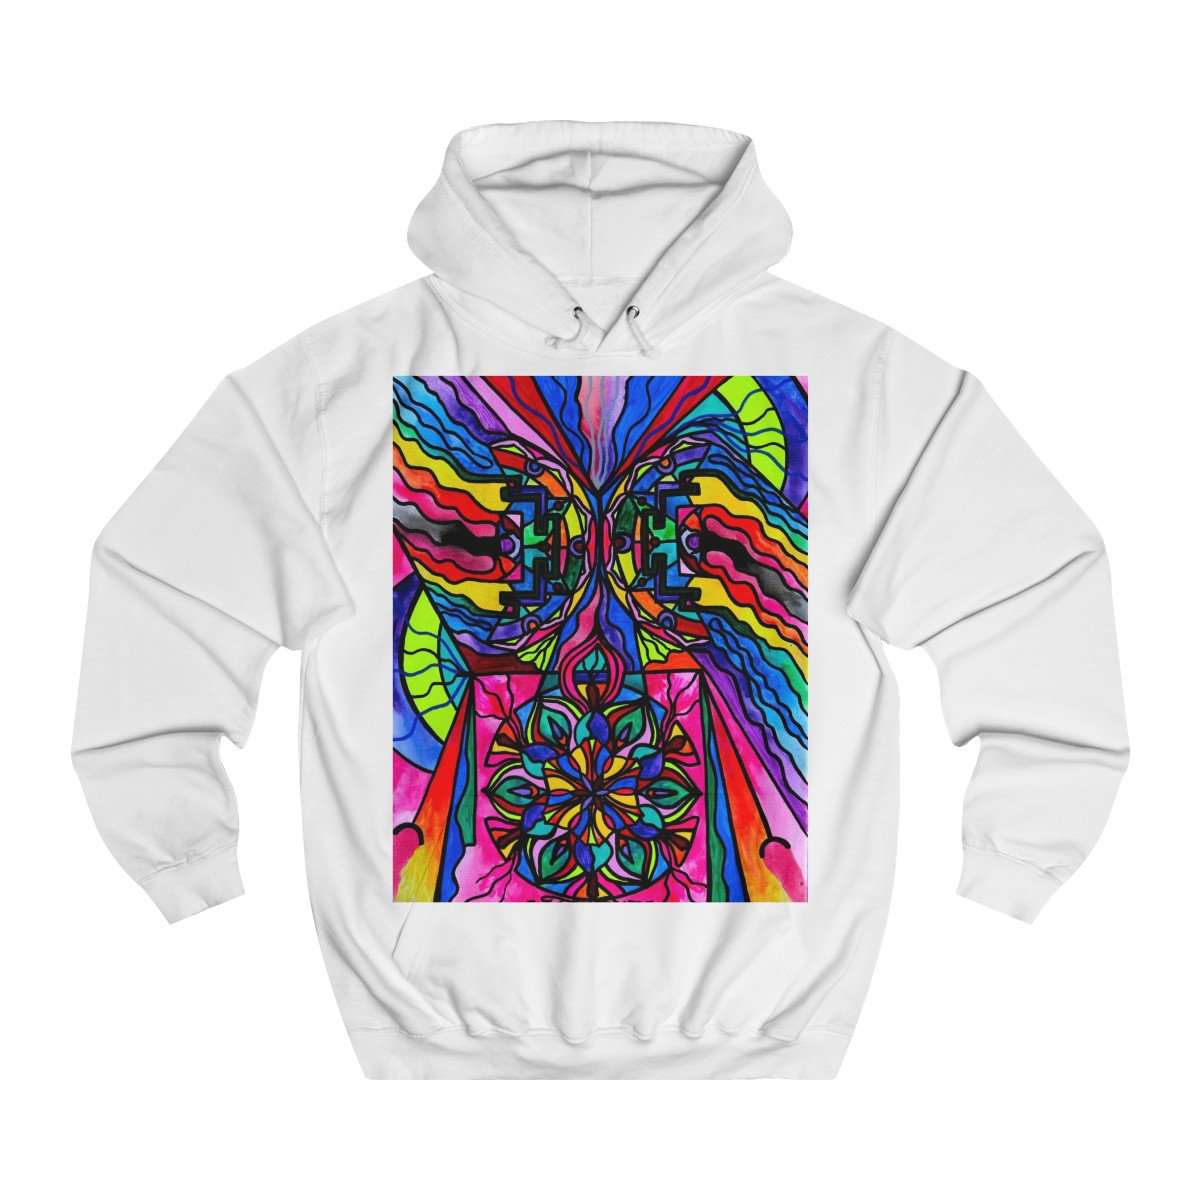 shop-for-non-attachment-unisex-college-hoodie-hot-on-sale_1.jpg